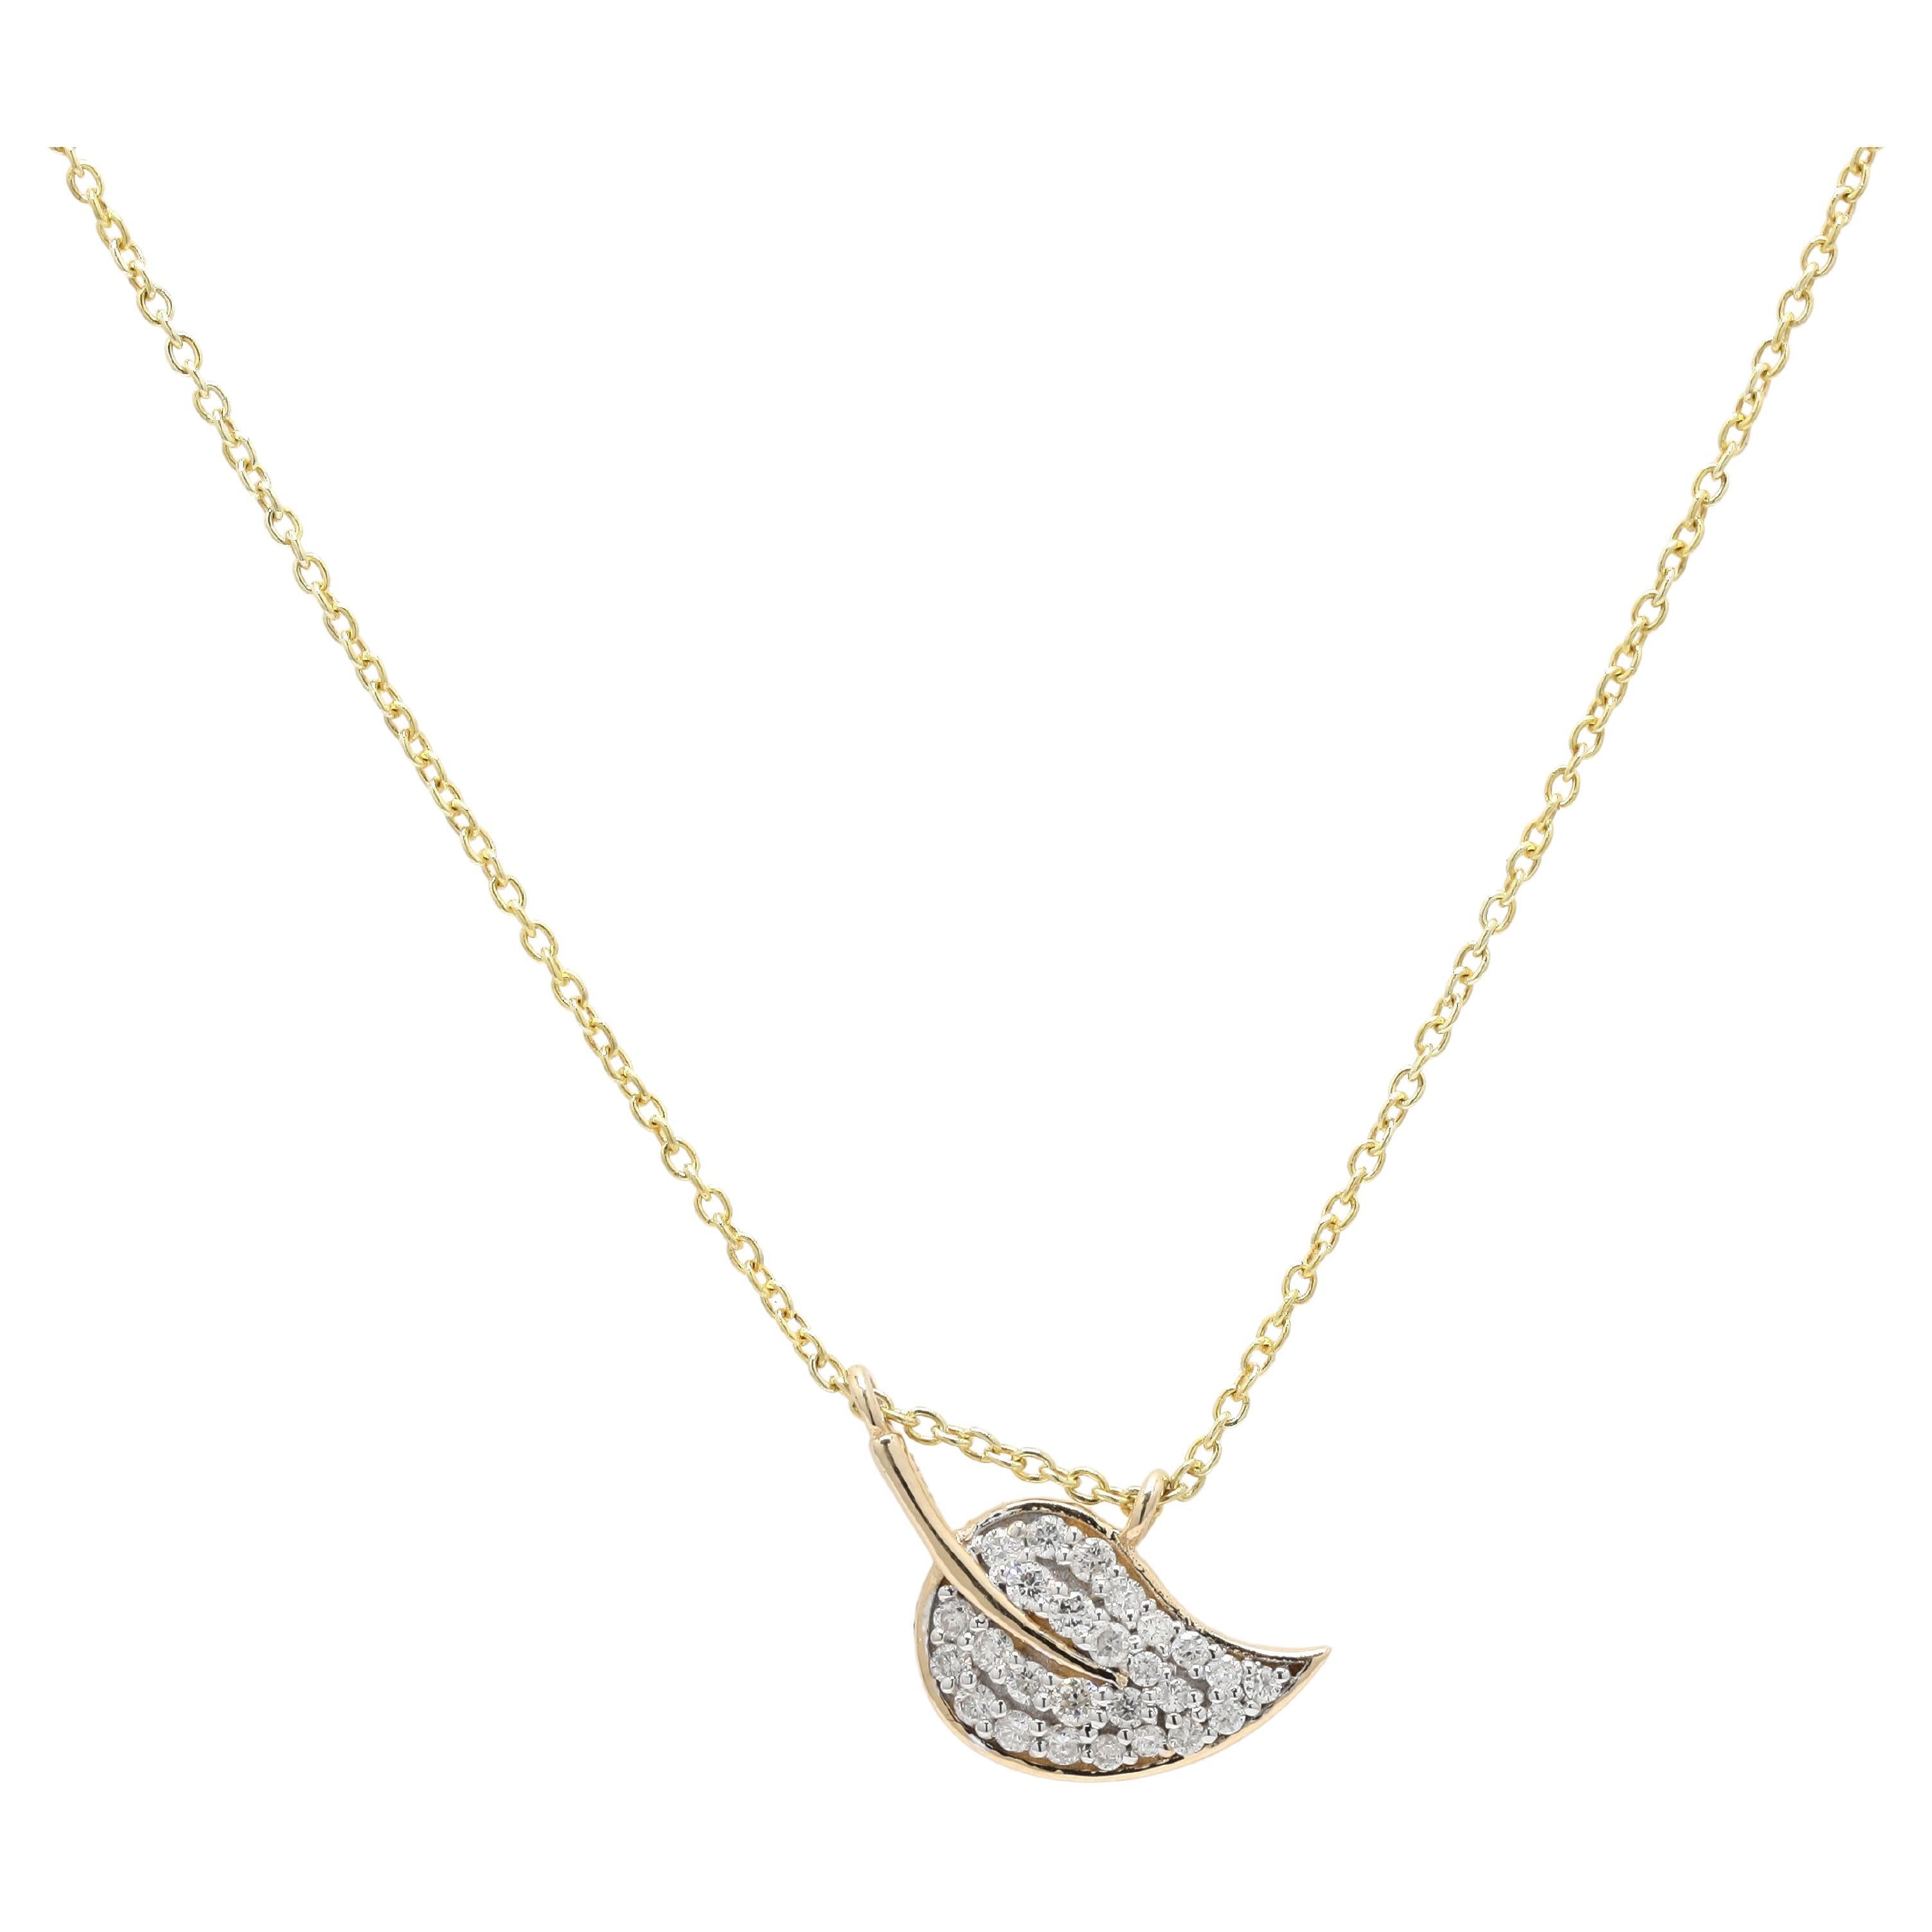 3 Carved Leafs Pendant With Halo Diamonds Made In 14k Yellow Gold For ...